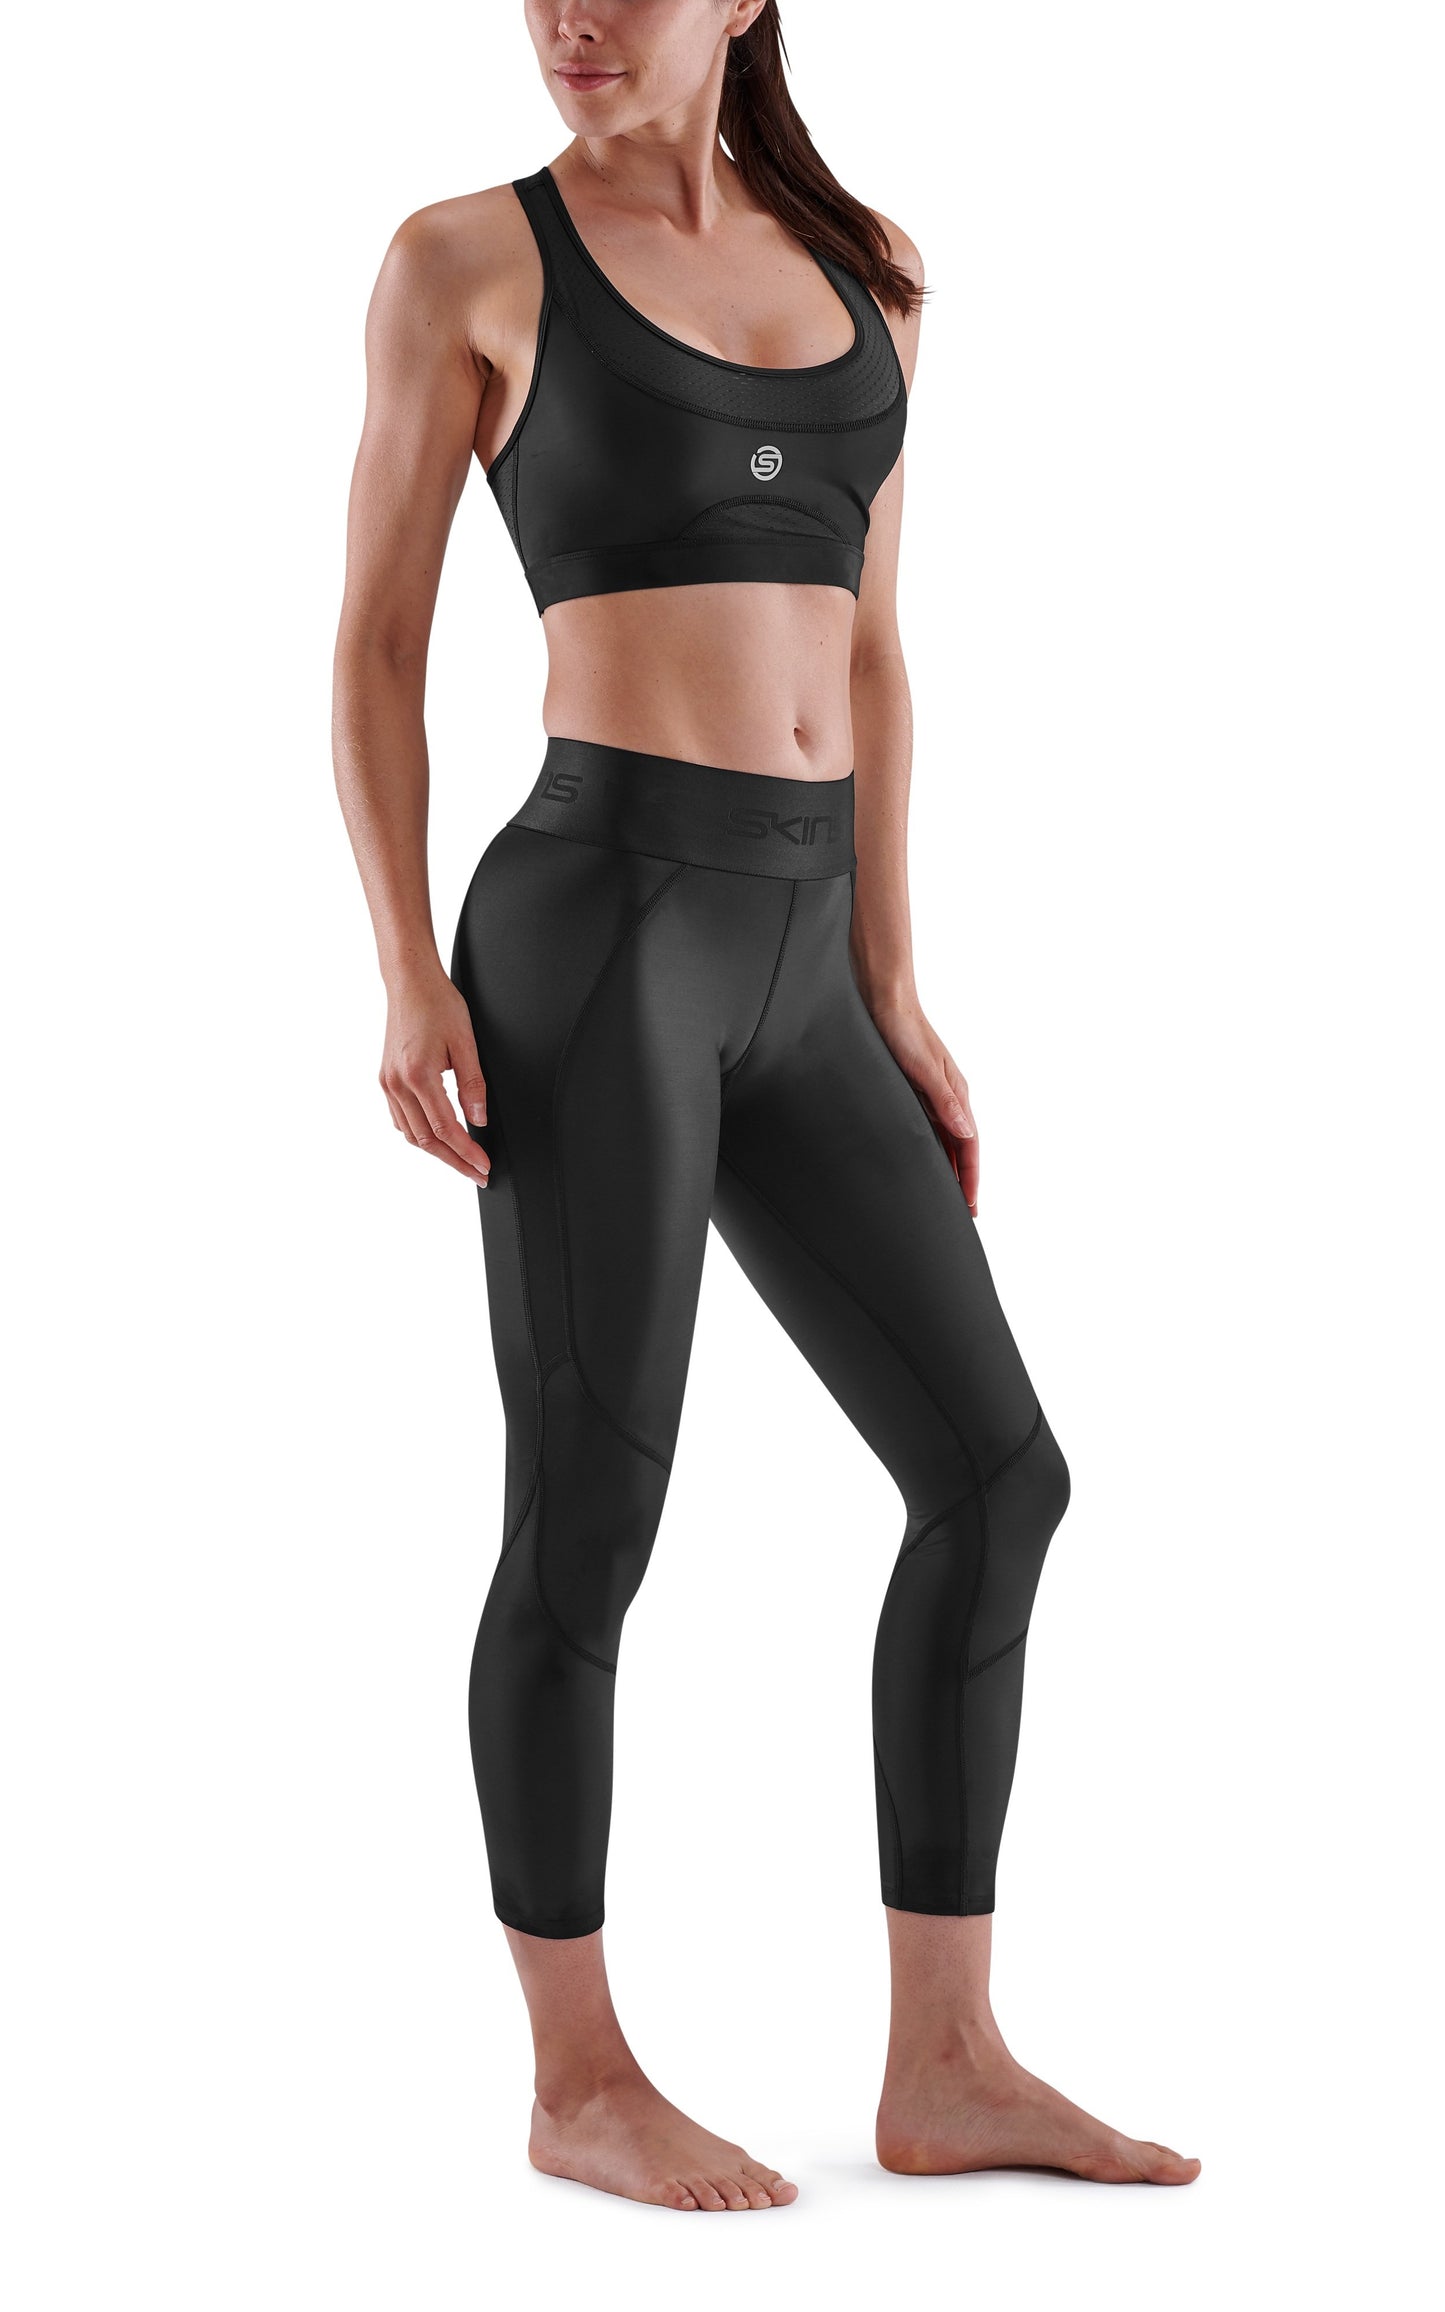 SKINS Women's Compression Long Tights 3-Series - Black